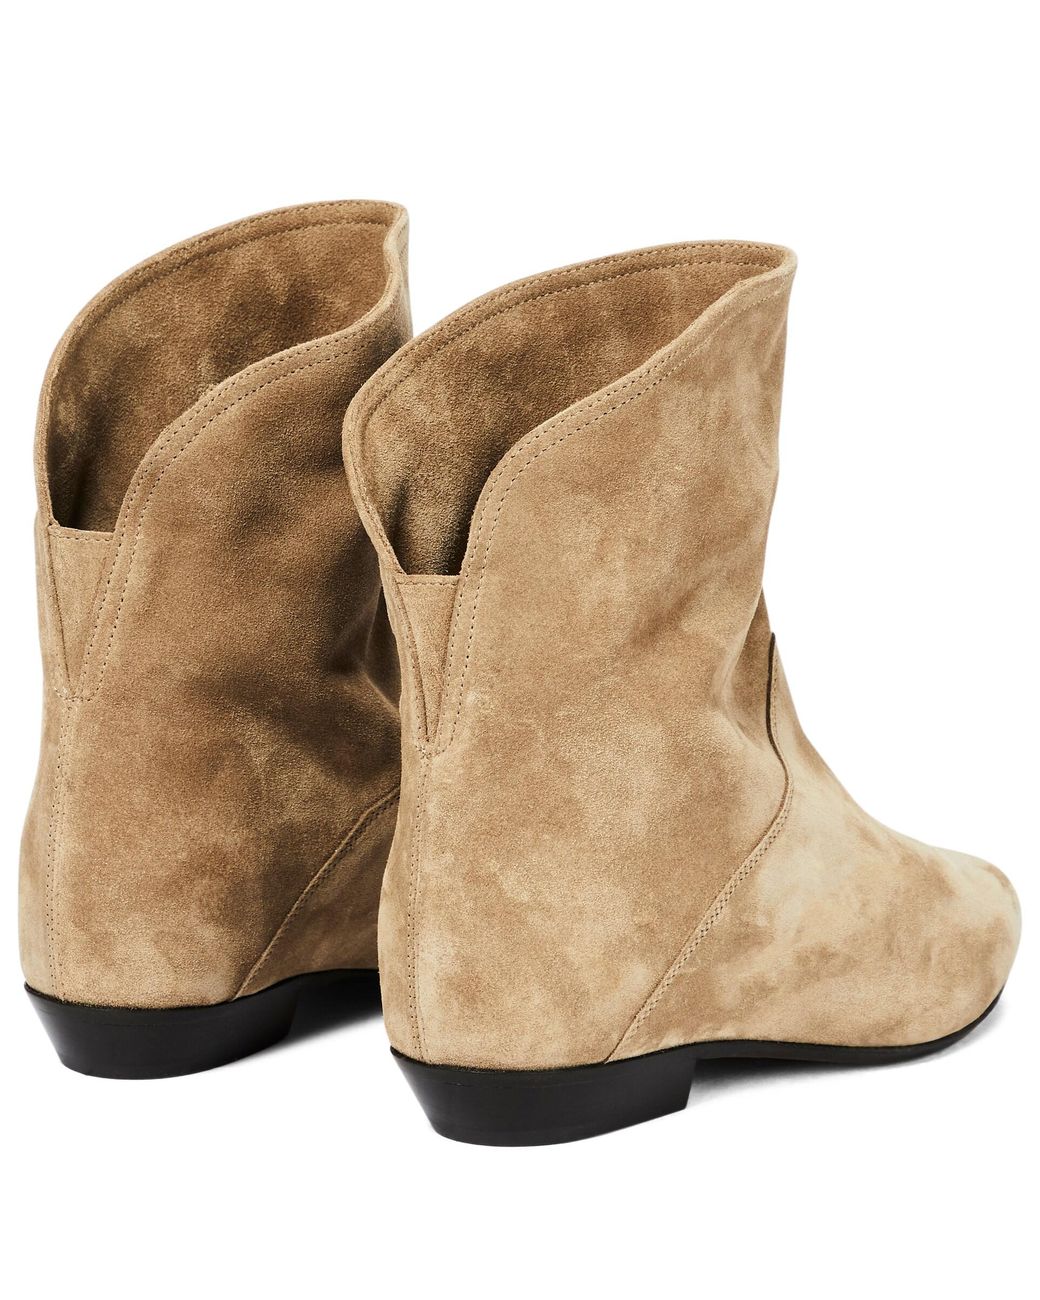 Isabel Marant Solvan Suede Ankle Boots in Natural | Lyst